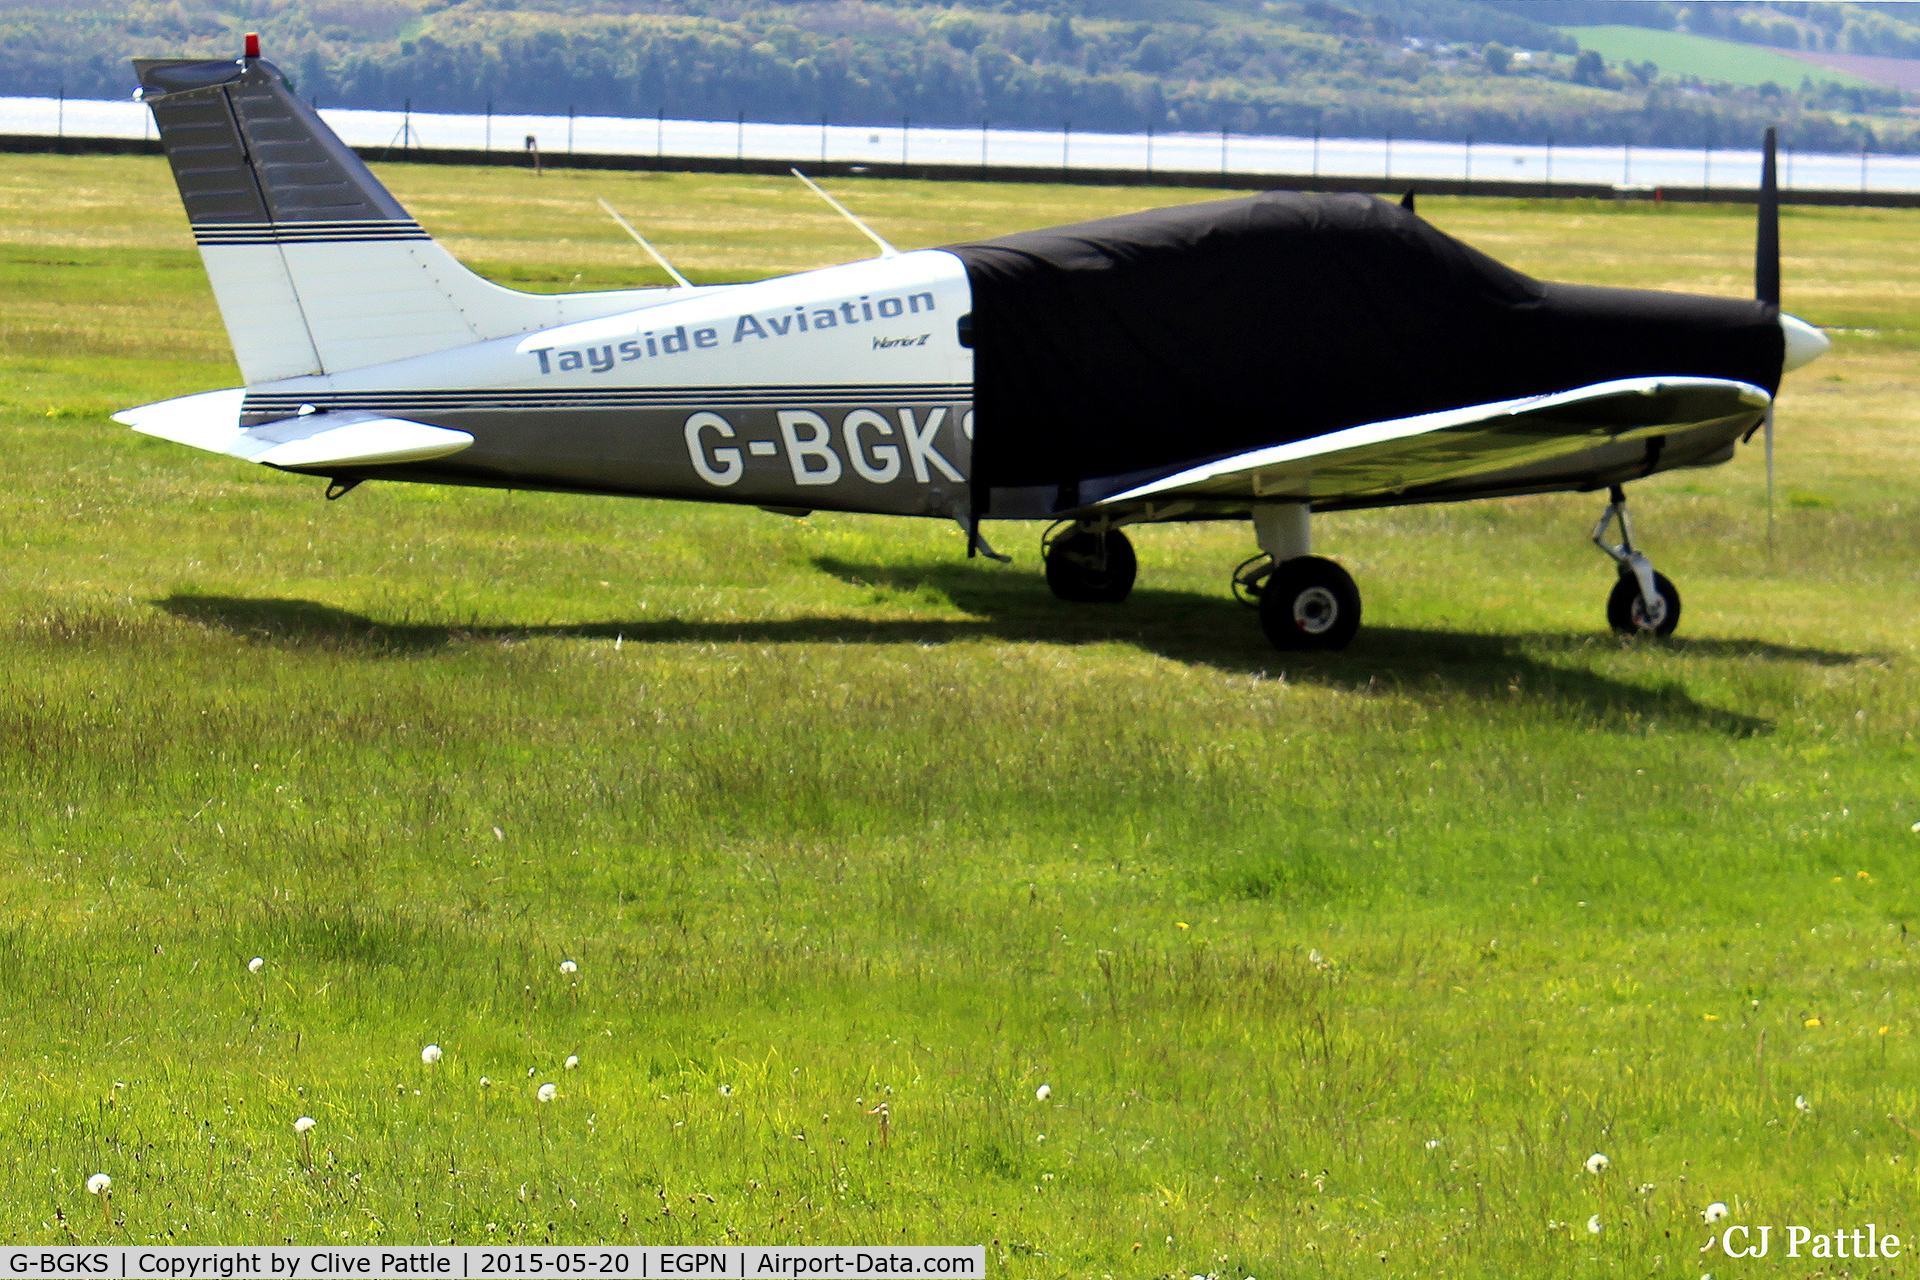 G-BGKS, 1978 Piper PA-28-161 Cherokee Warrior II C/N 28-7916221, 'KS' out to pasture in the sunshine at Dundee Riverside airport EGPN.